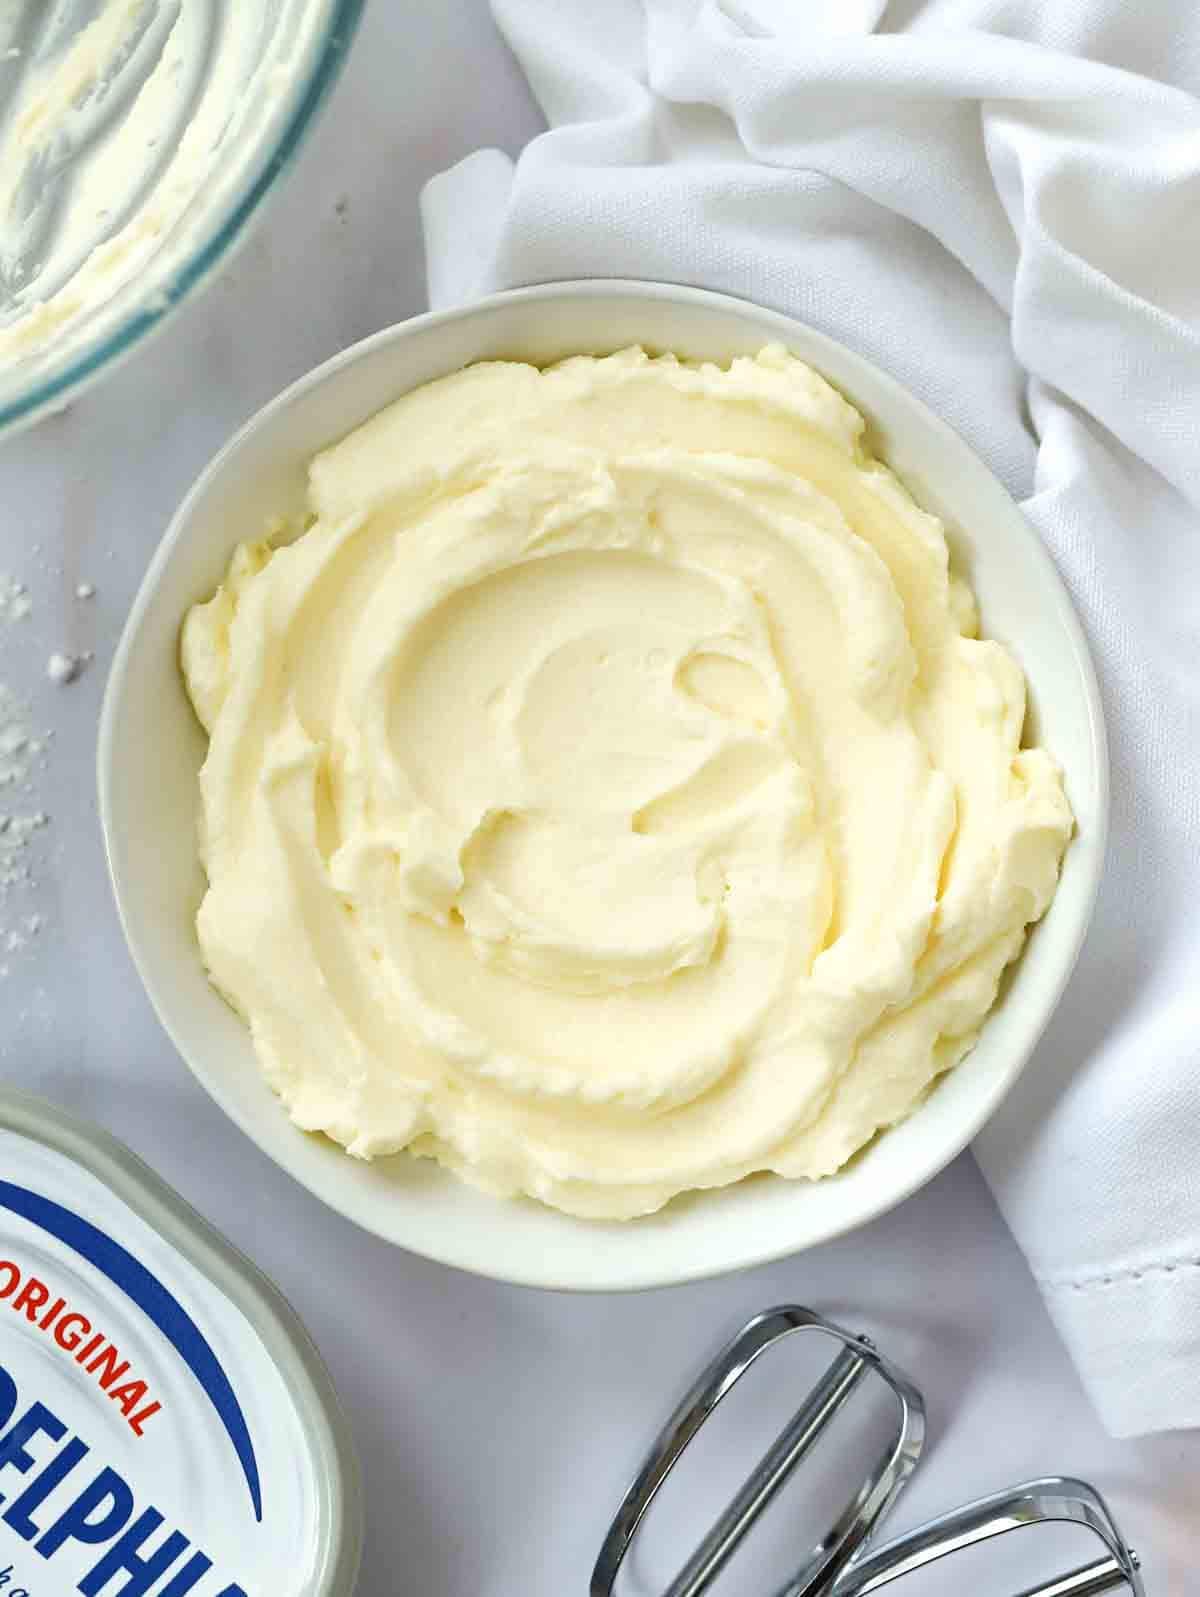 A bowl on a white table cloth, filled with cream cheese frosting, surrounded by a bowl and pack of cream cheese and a whisk.